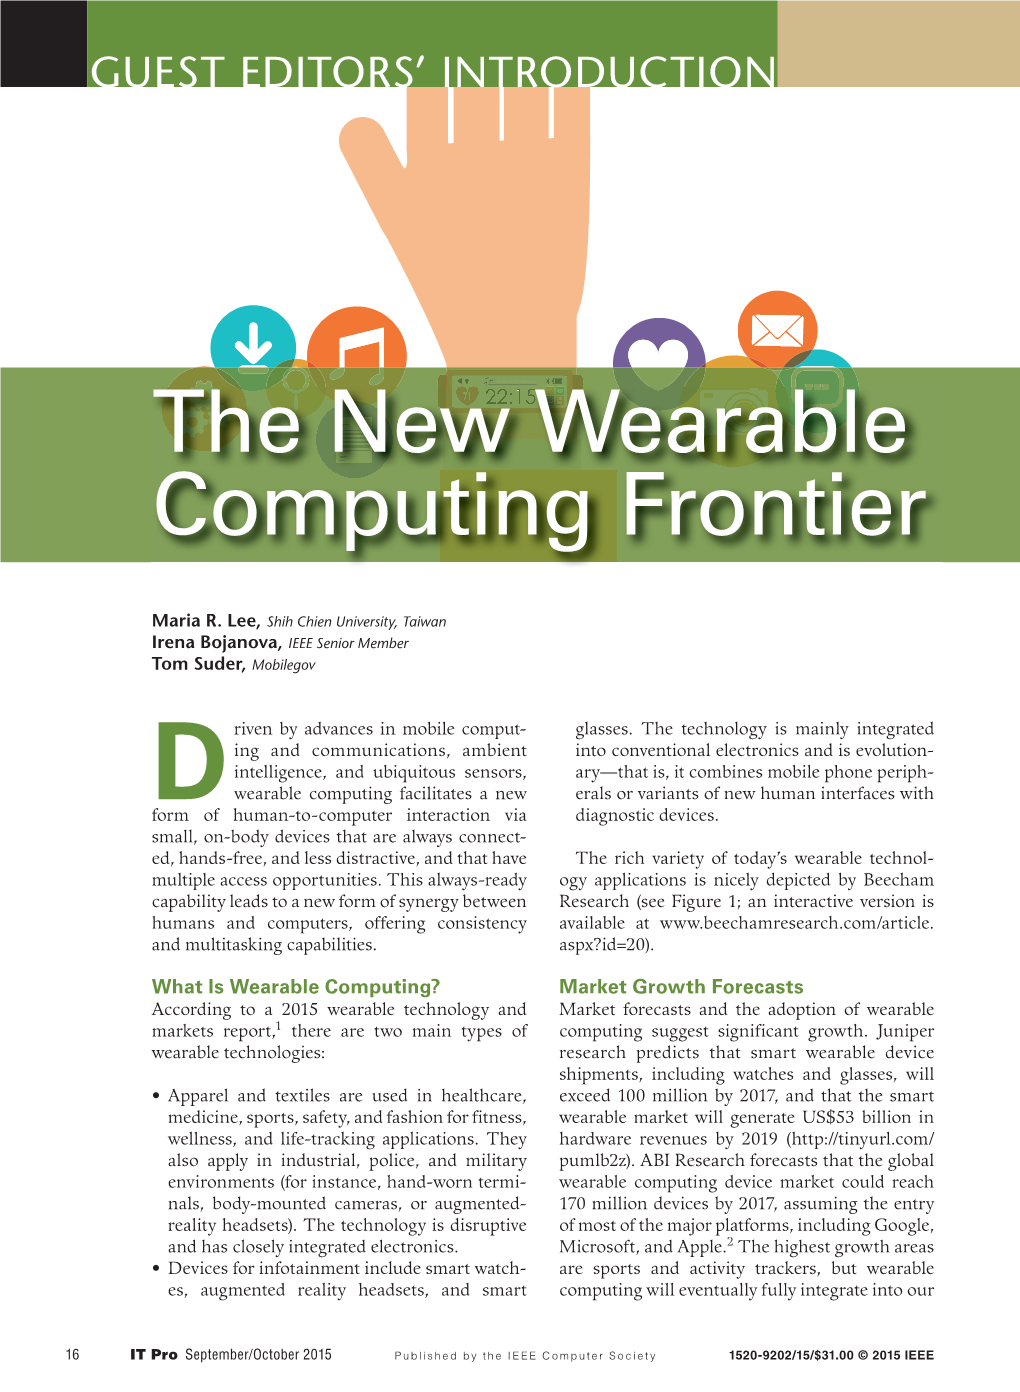 The New Wearable Computing Frontier